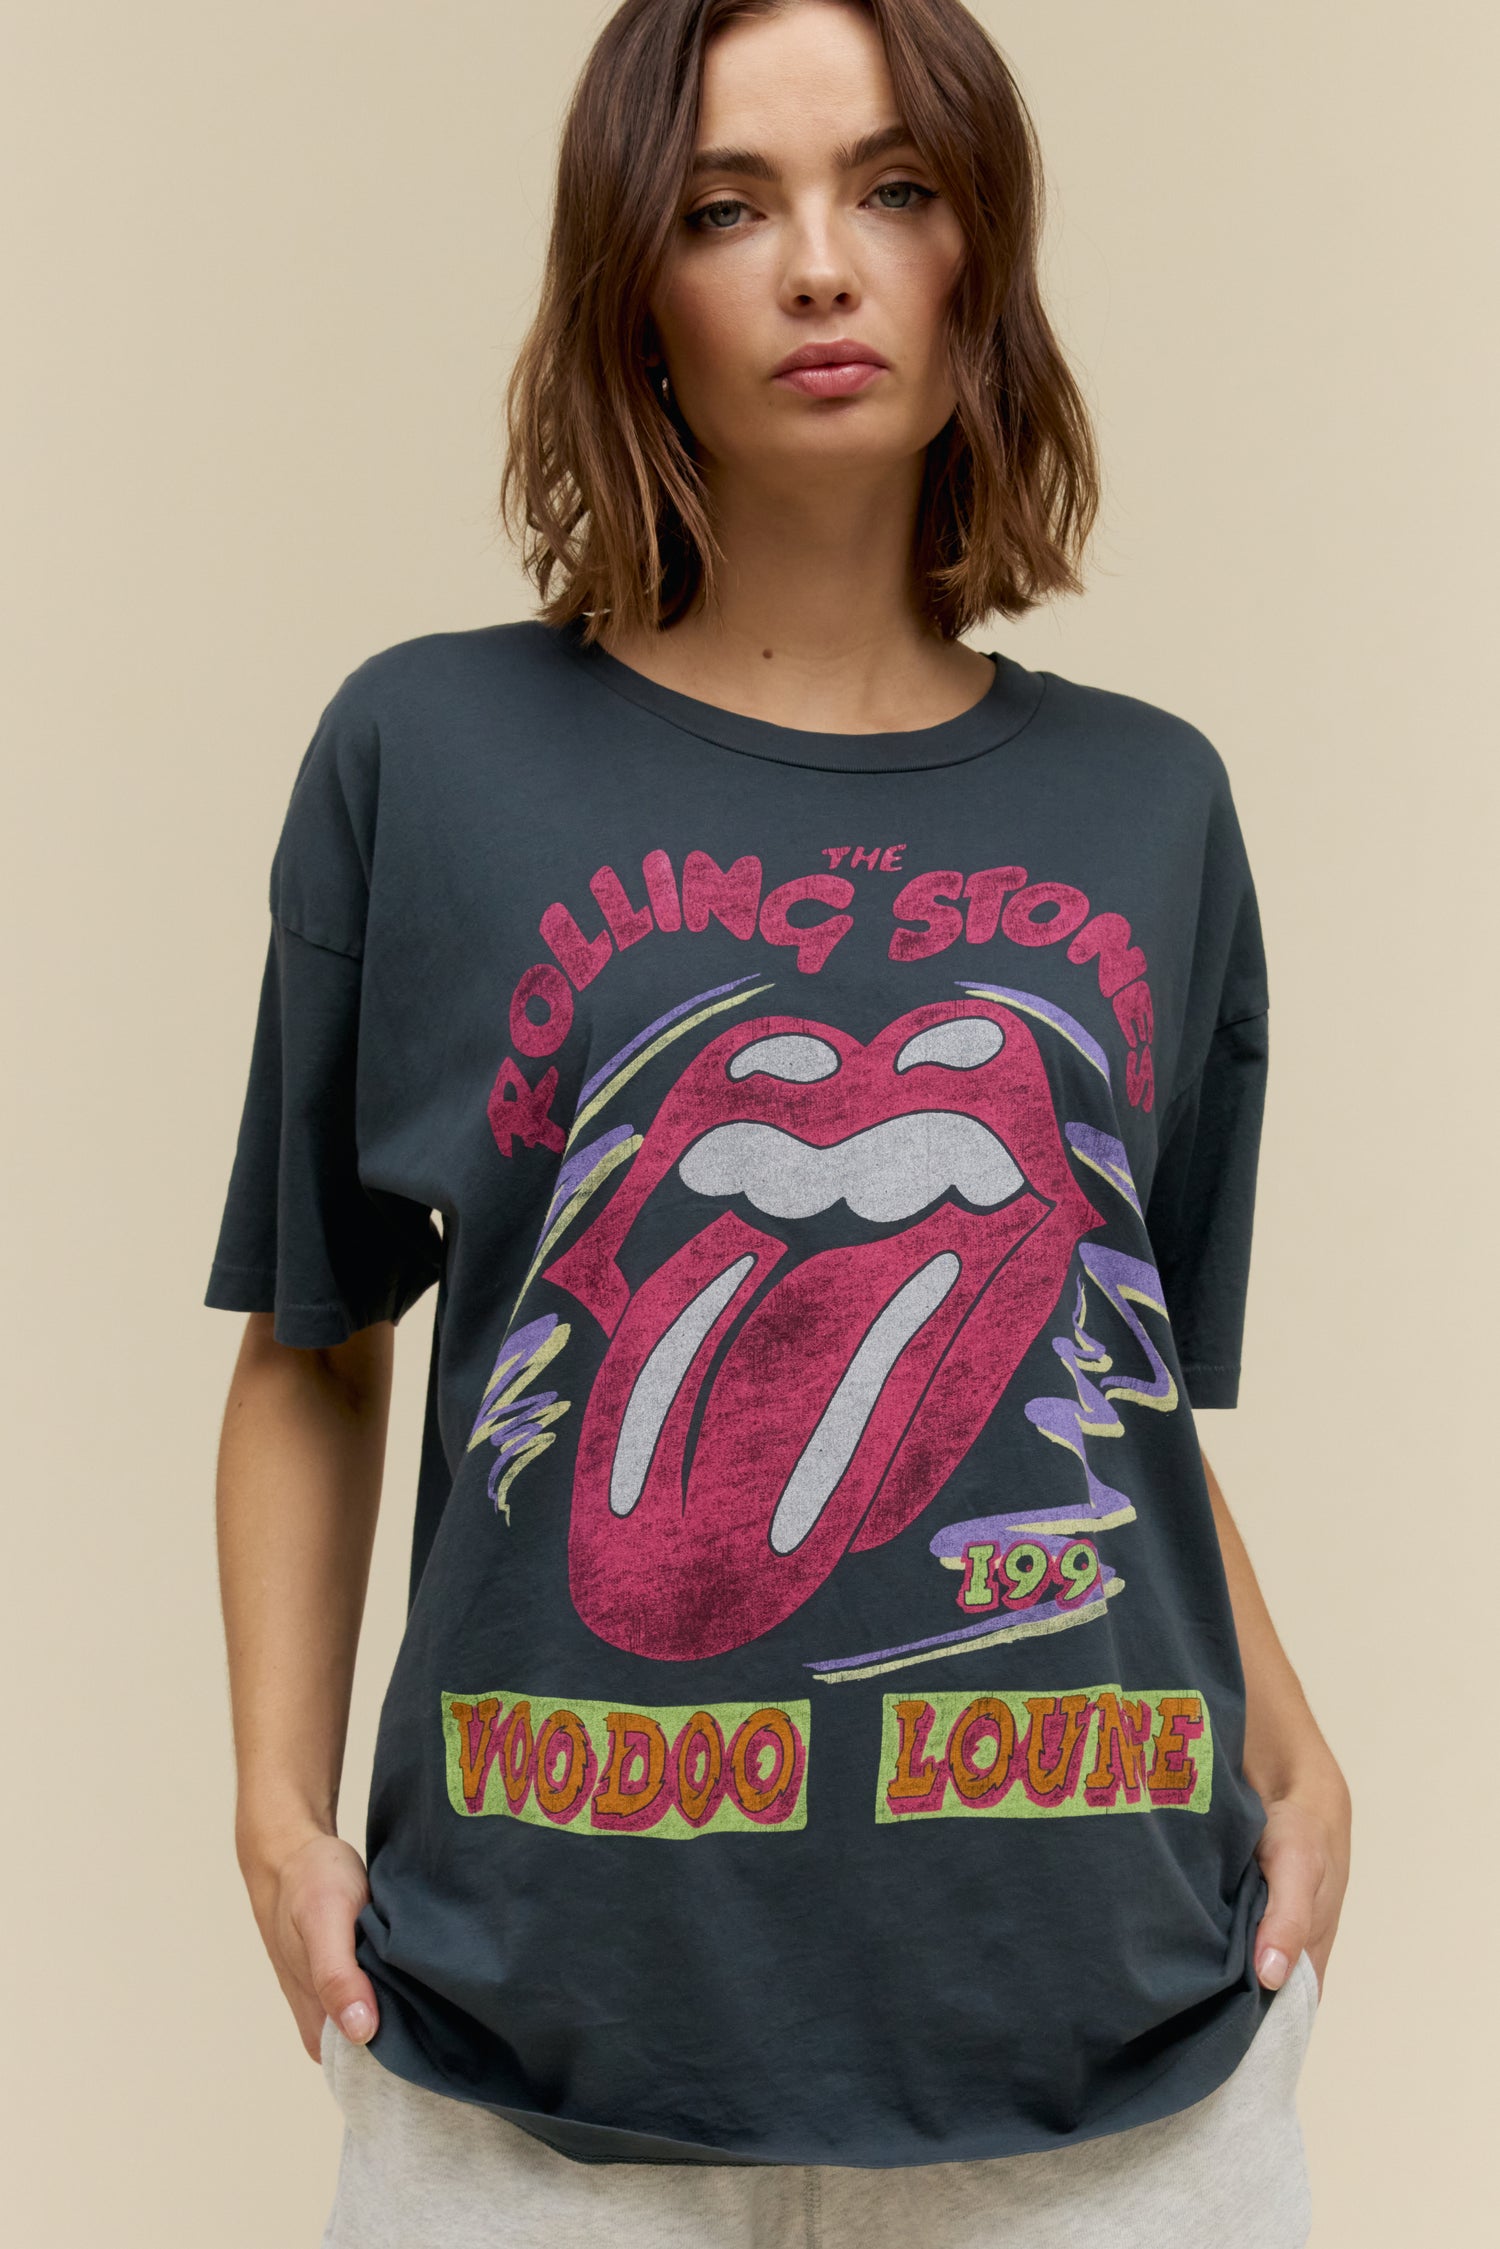 Model wearing a Rolling Stones Voodoo Lounge 1994 graphic tee